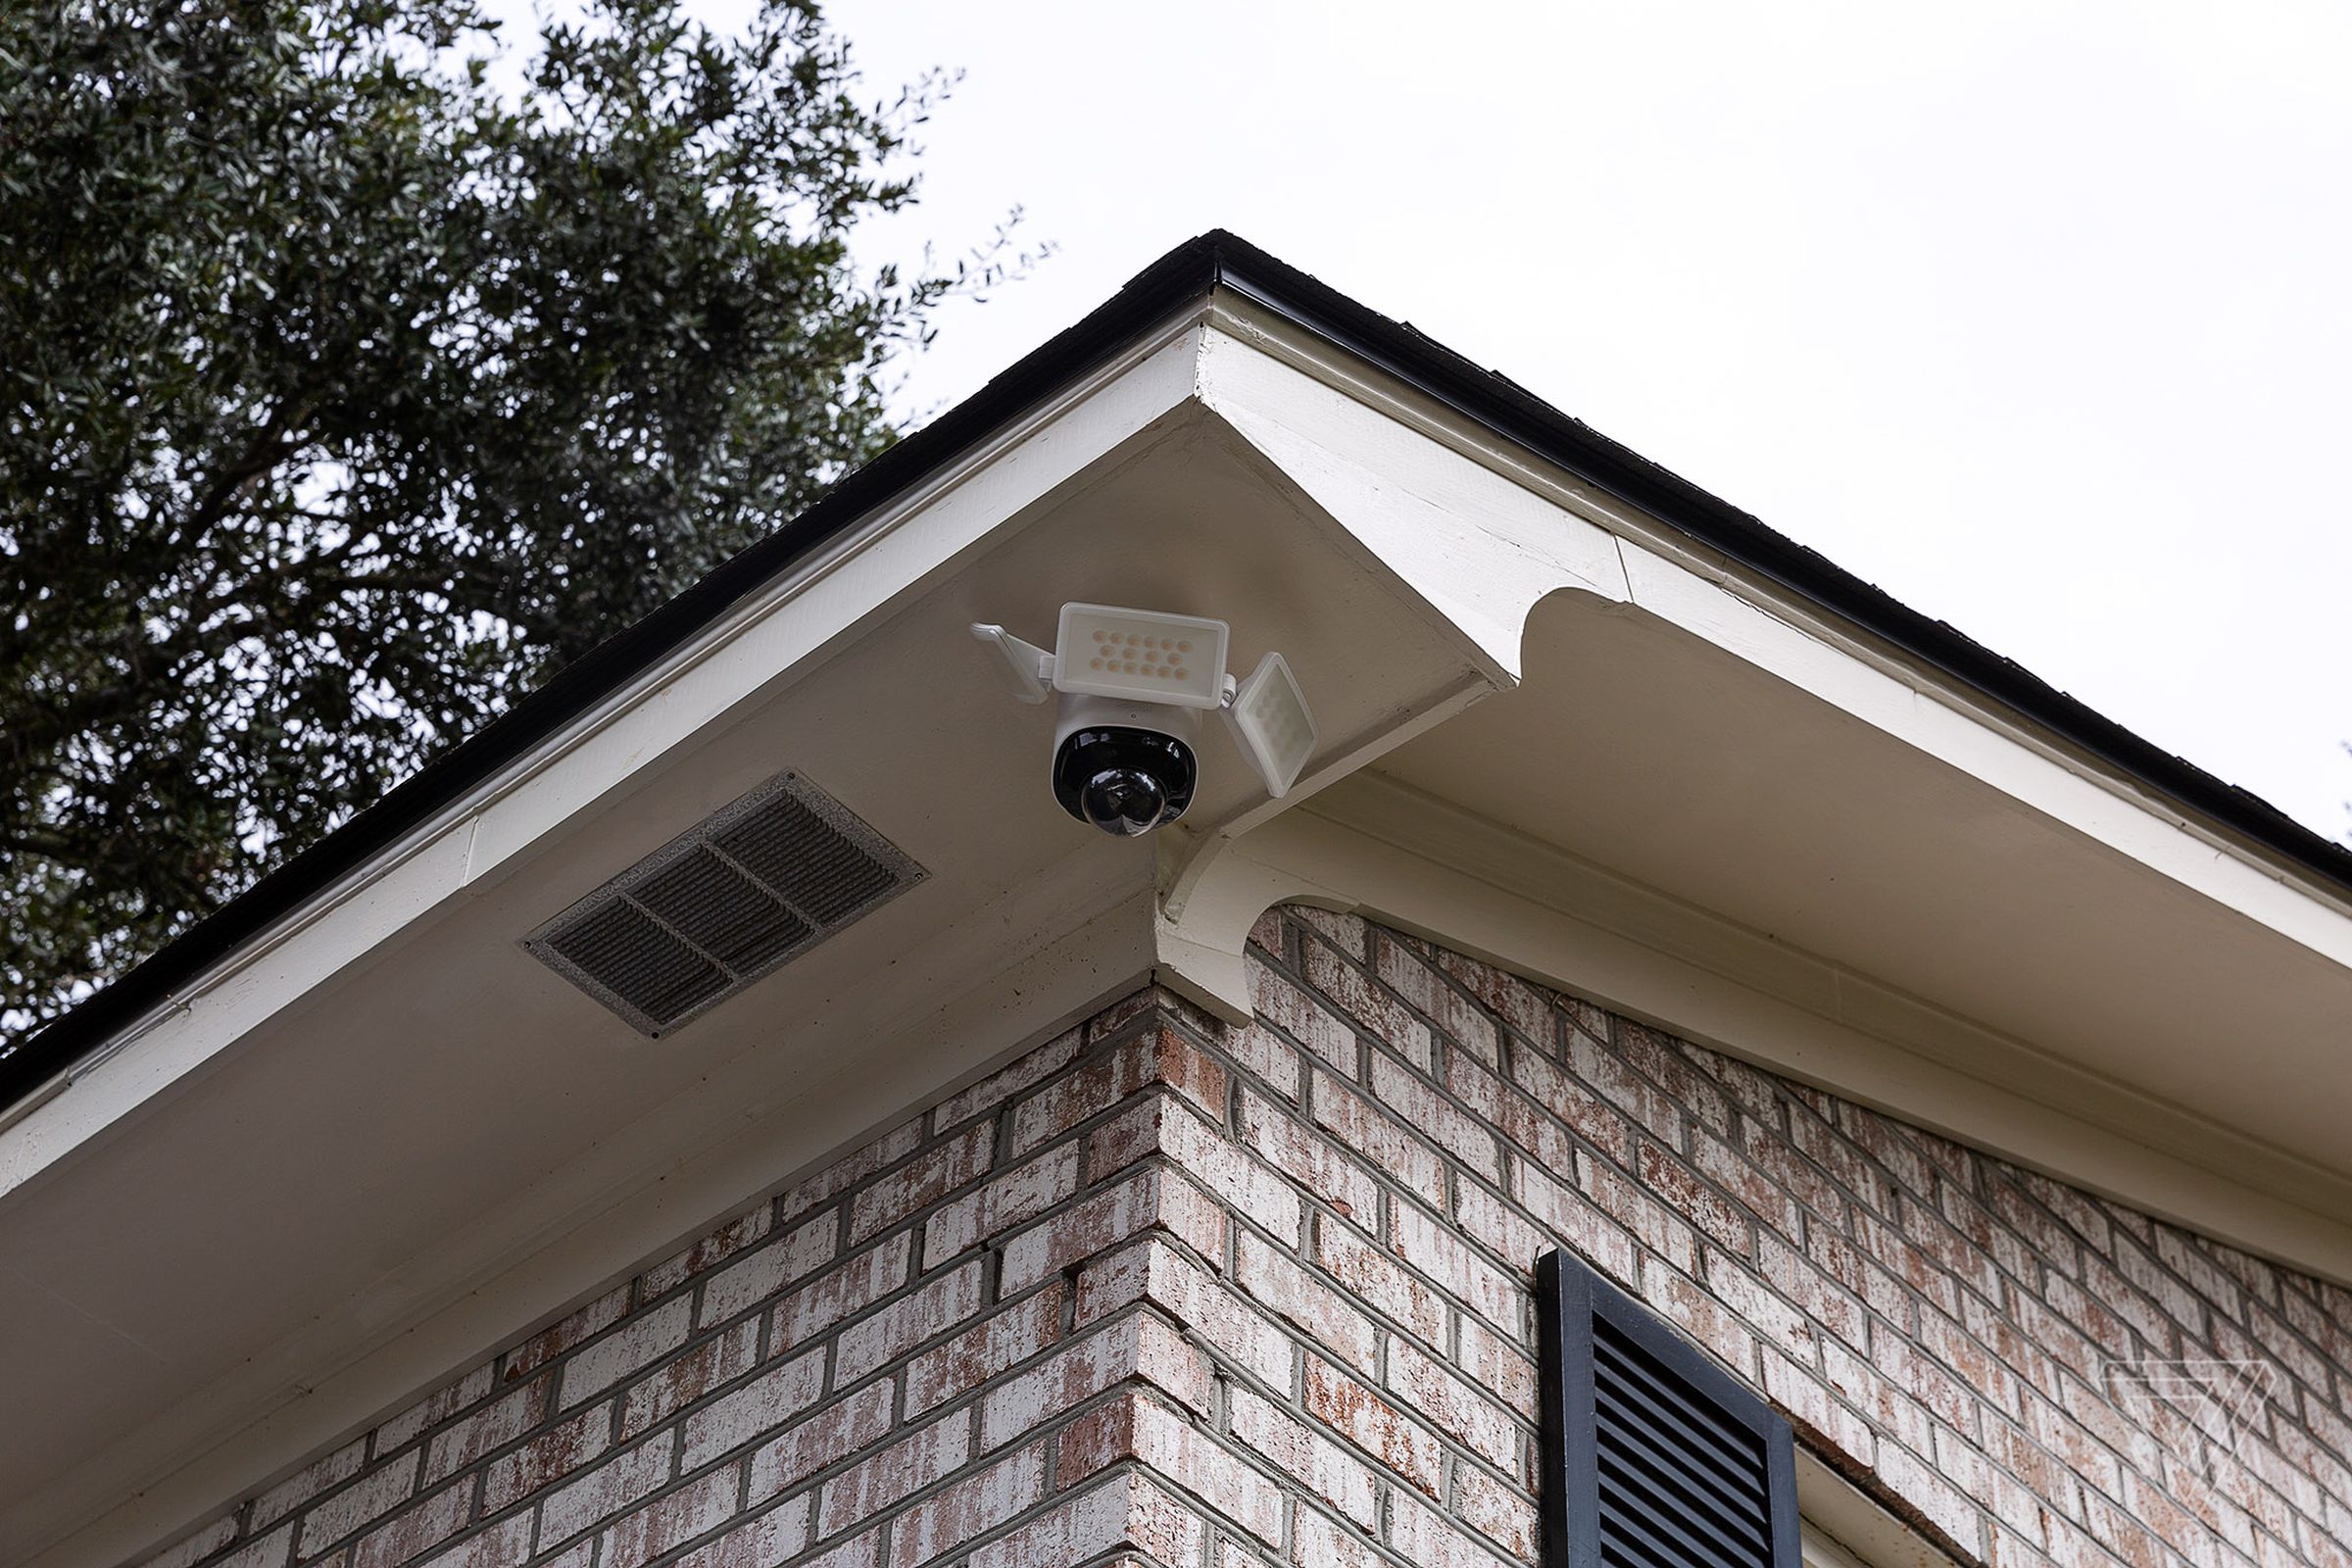 The Eufy Floodlight Cam 2 Pro looks like a mall security camera hanging off your house. It only works under eaves (as pictured), not mounted on a wall.